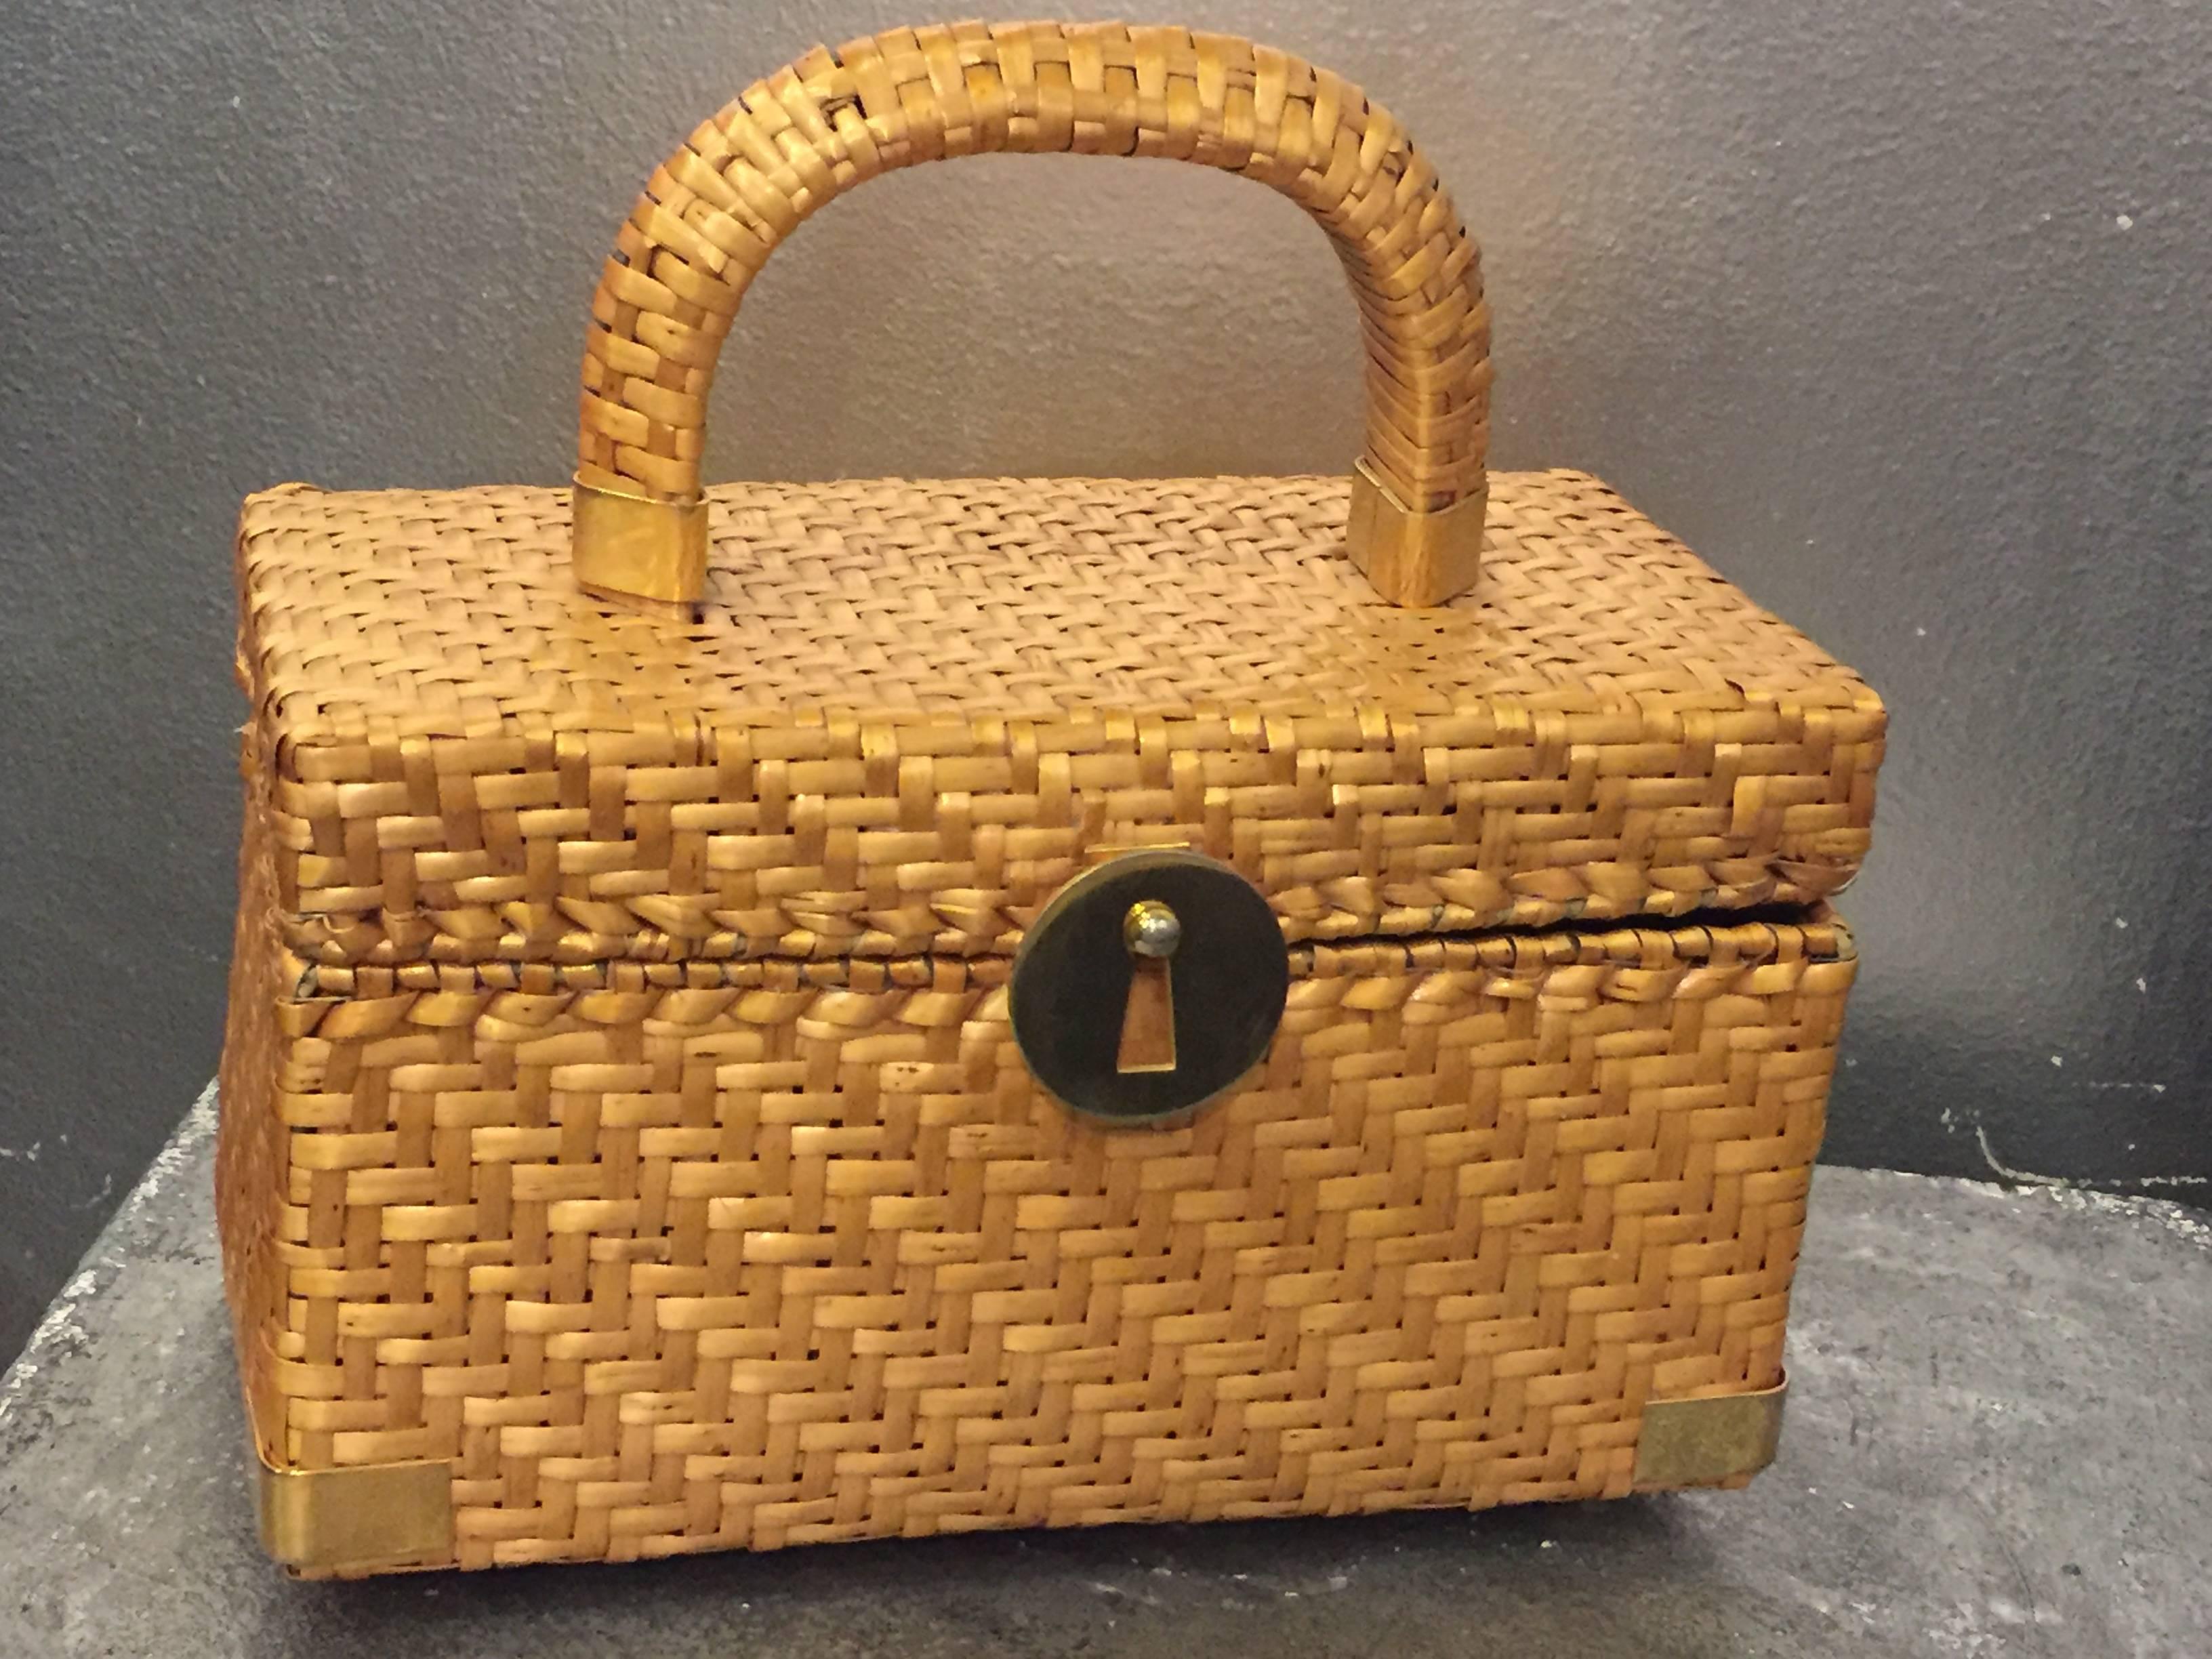 A fun and lady-like resort purse in a box shape, by Koret. Featuring signature hardware in gold tone. Fully lined with coordinating fabric. 